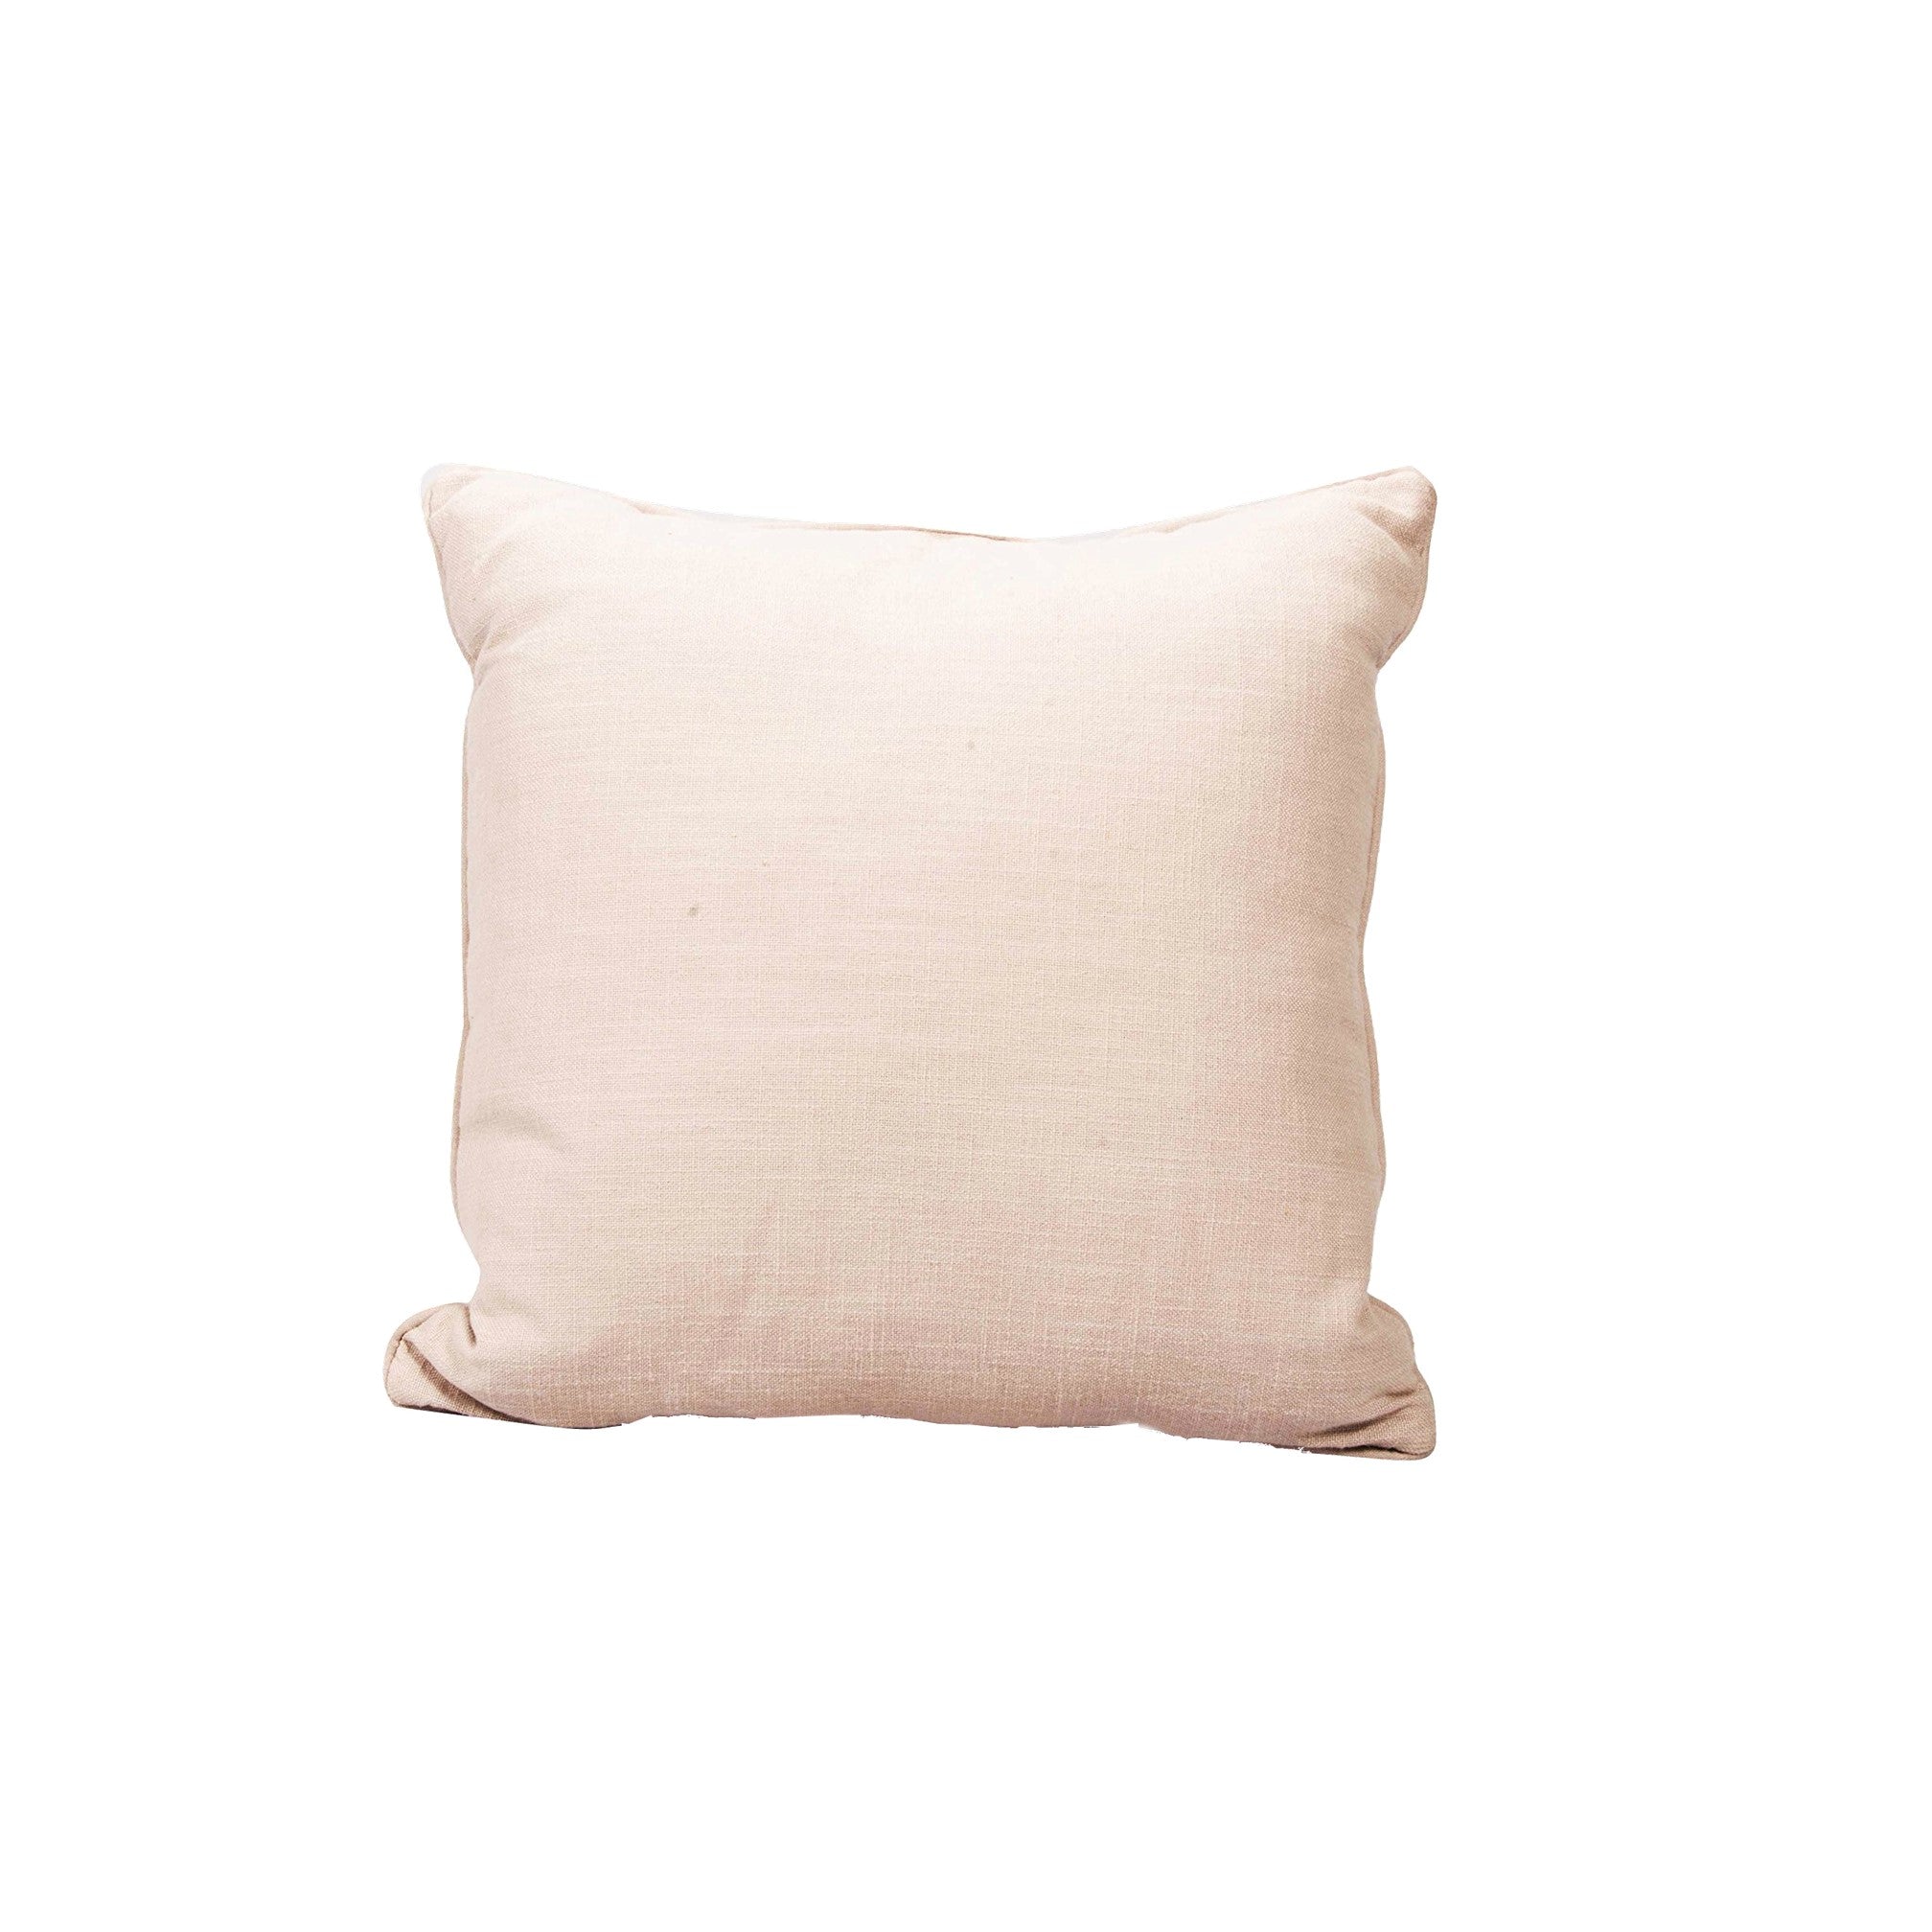 Cotton Cushion Cover in Ivory 1 BHK Interiors